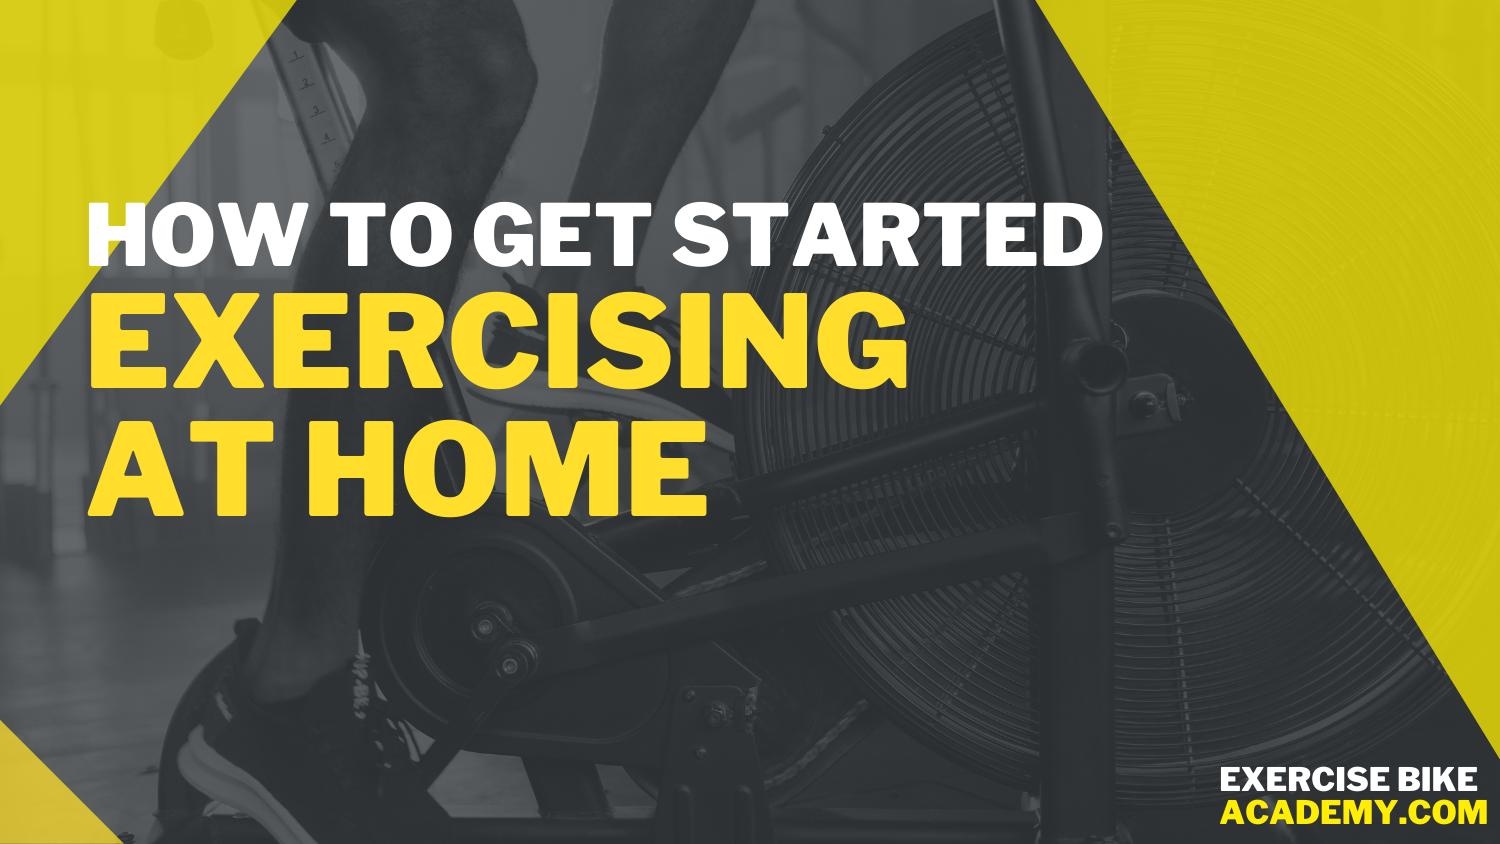 How to get started exercising at home